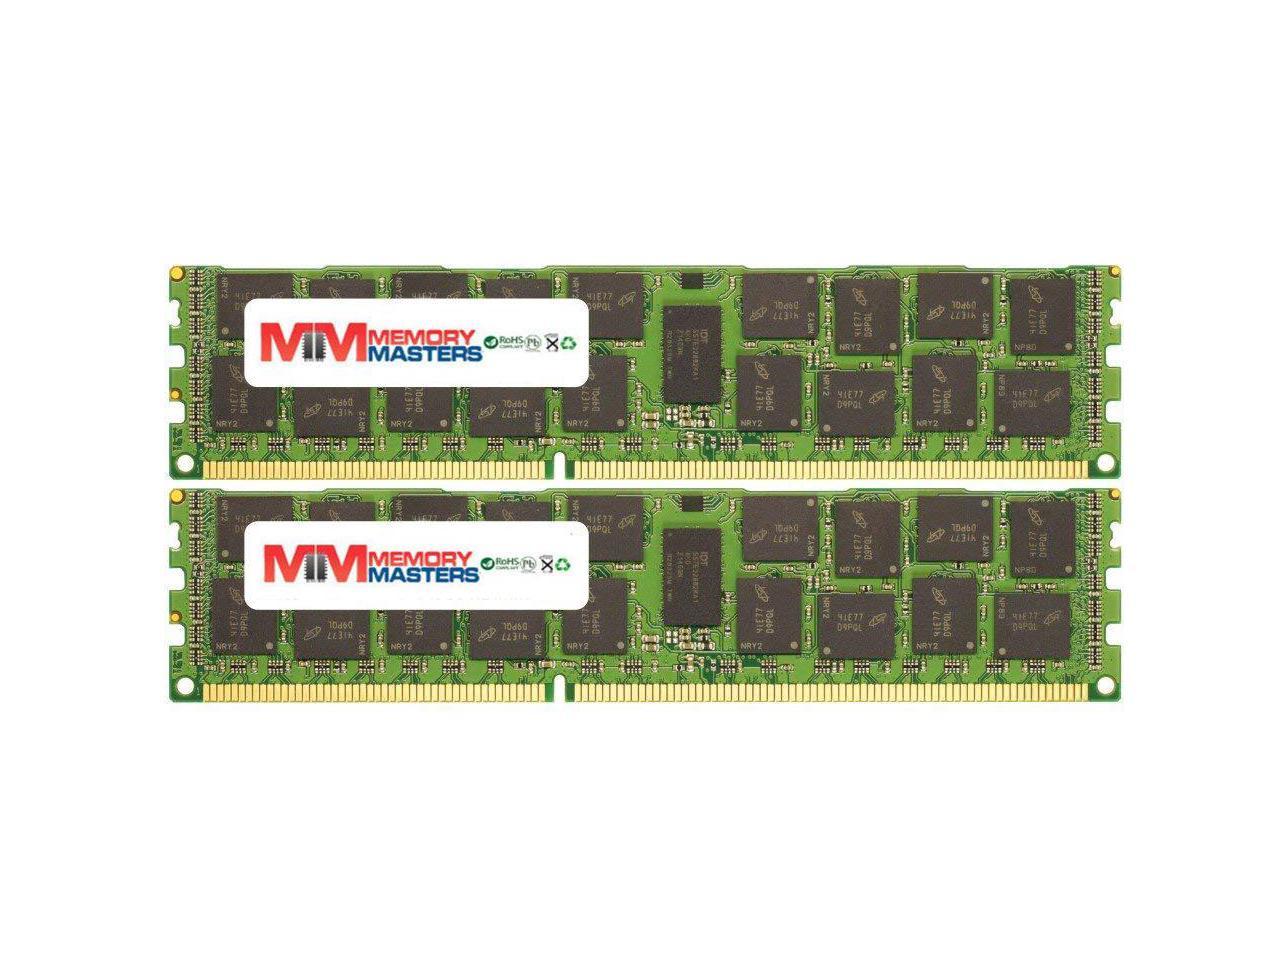 16GB RAM Memory Compatible for Series DL580 G7 Base 240pin PC3-8500 DDR3 ECC Registered RDIMM 1066MHz MemoryMasters Memory Module Upgrade